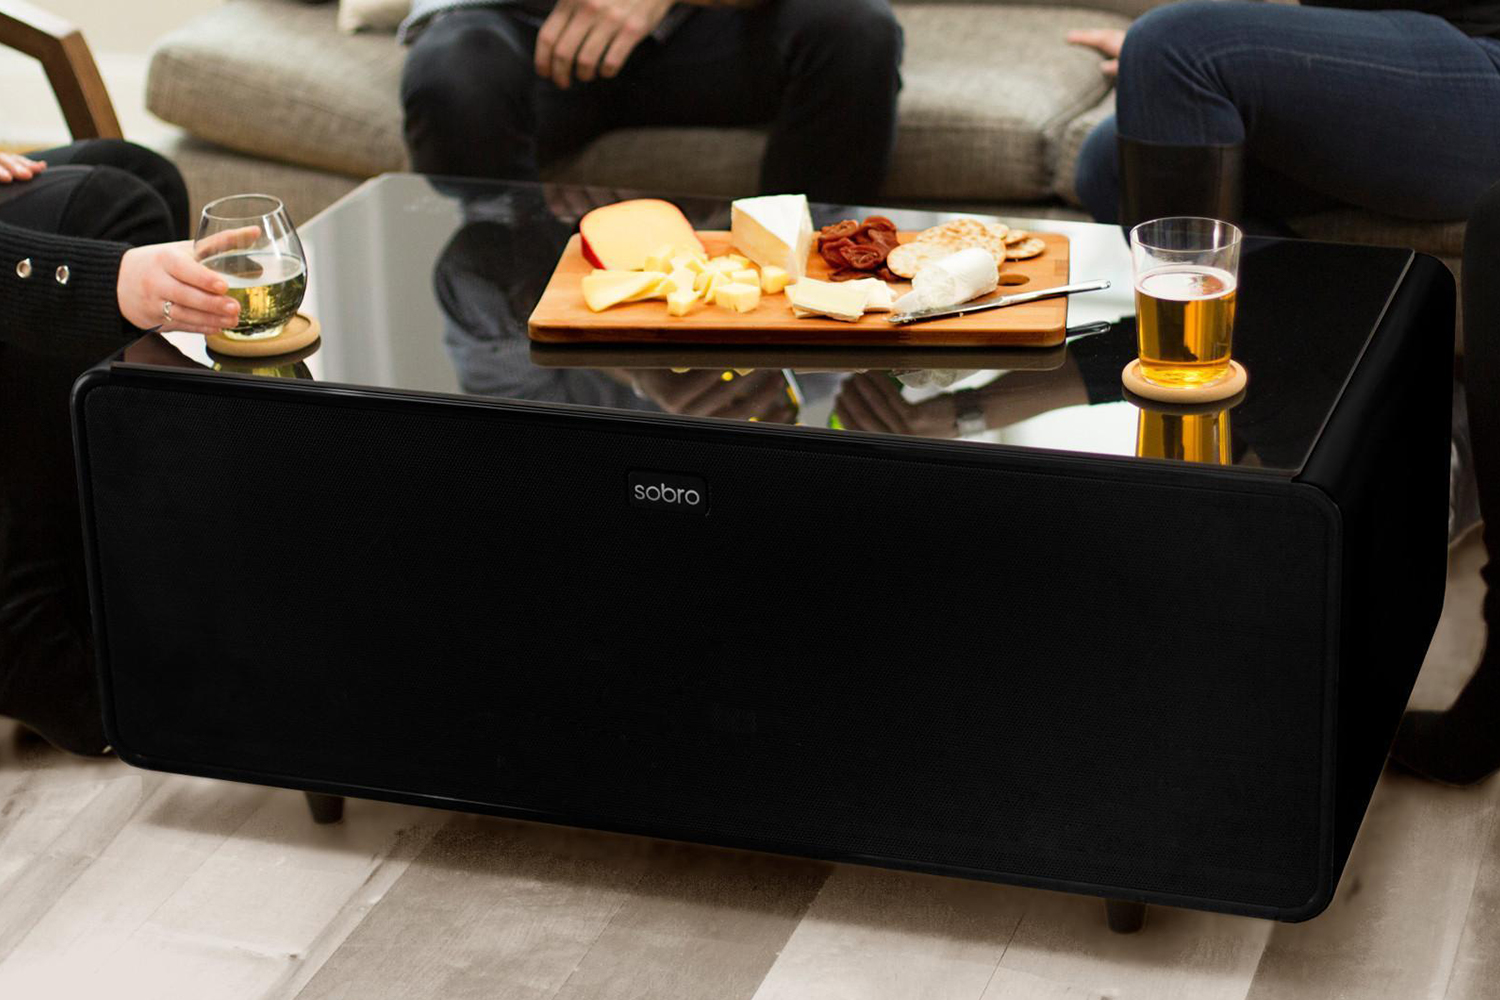 The Sobro Smart Coffee Table Is 500 Off at Wayfair